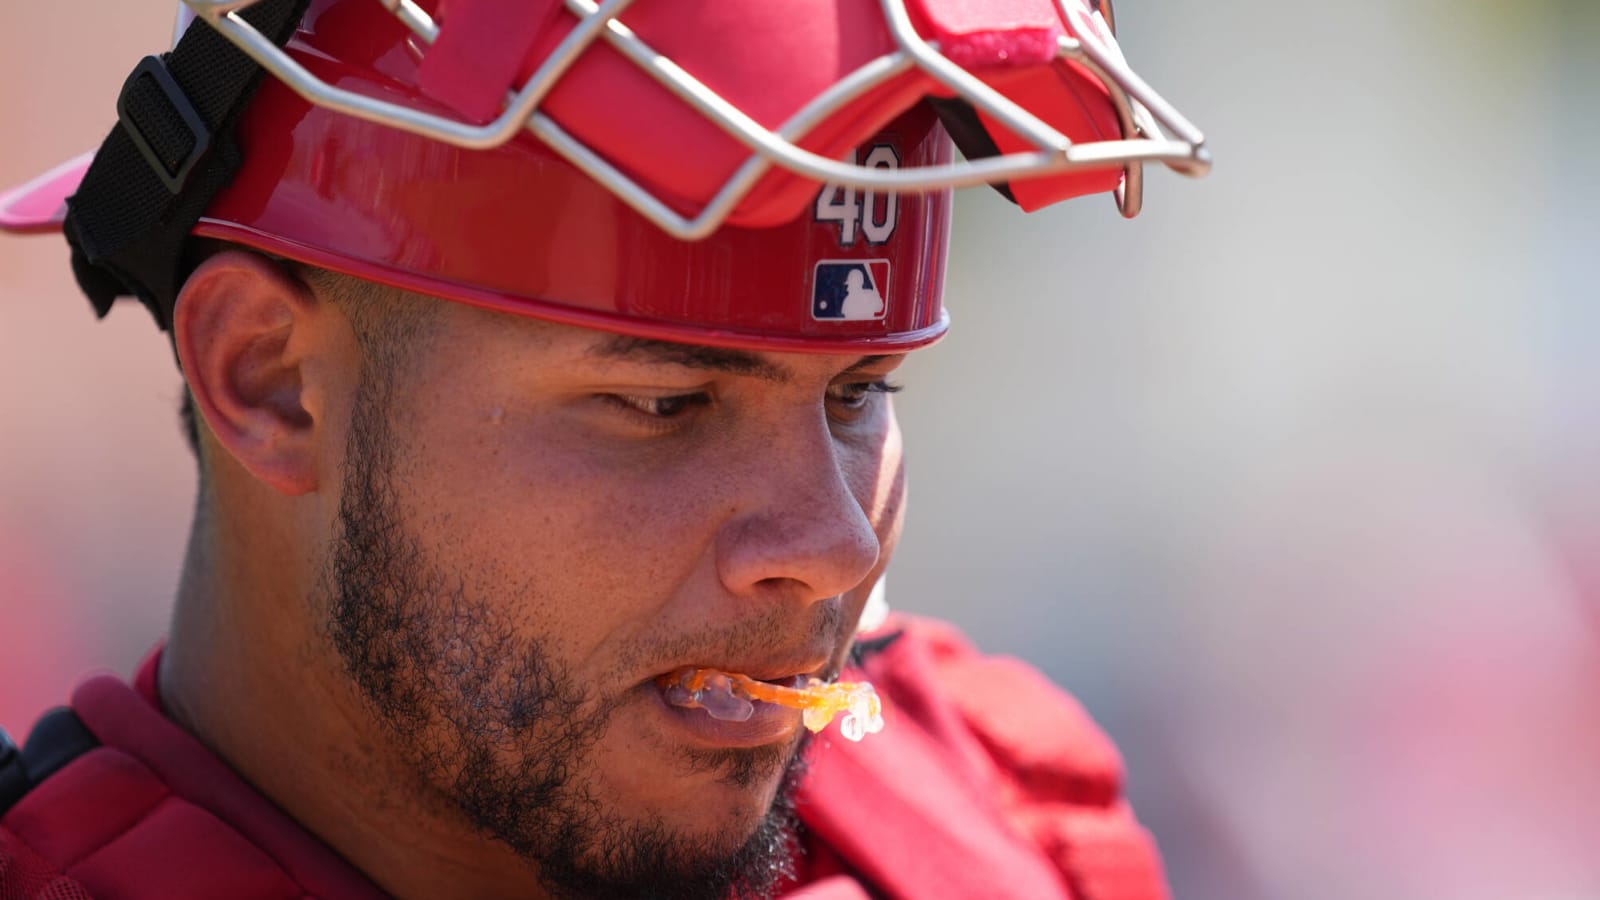 Has Cardinals catcher Yadier Molina had a hall of fame worthy